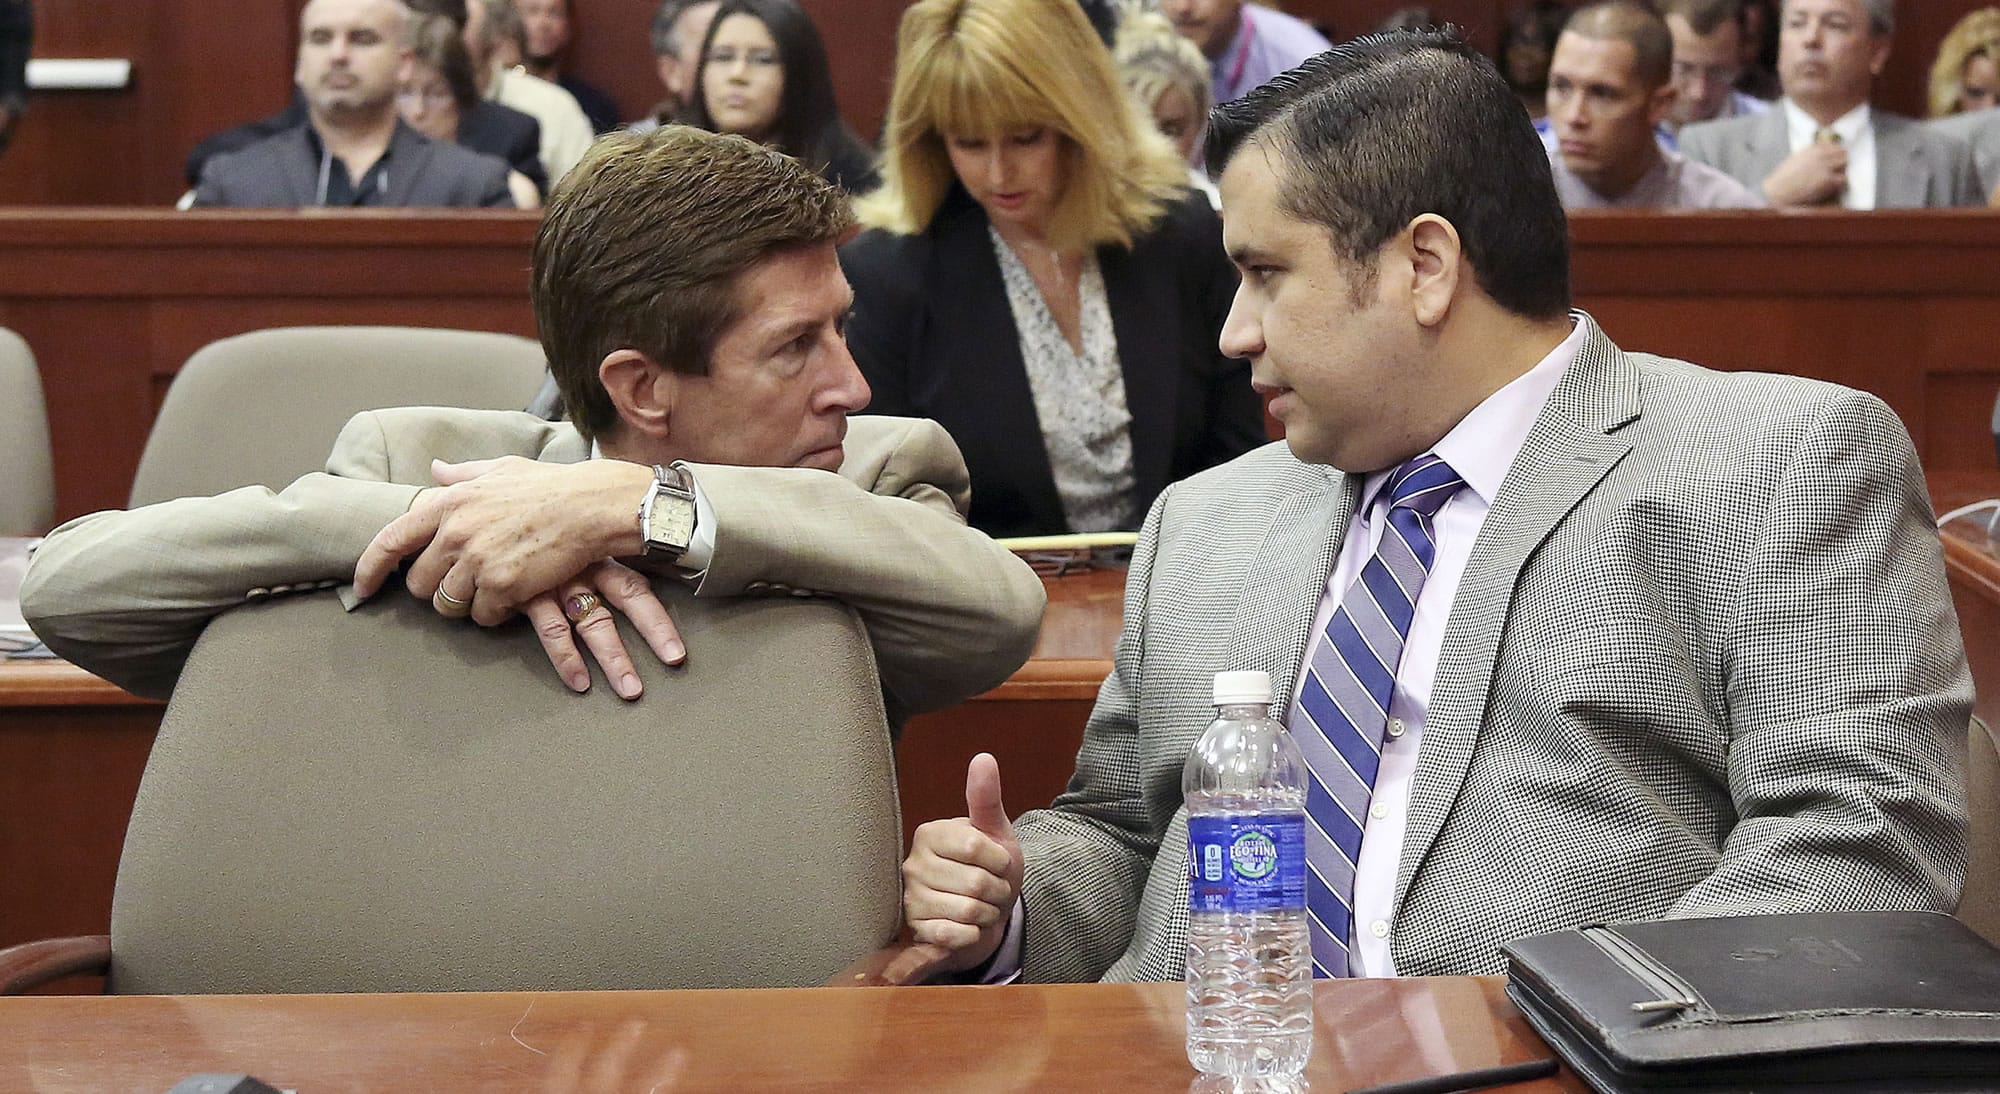 George Zimmerman, right, speaks with defense attorney Mark O'Mara during his trial in Seminole circuit court in Sanford, Fla., on Thursday.